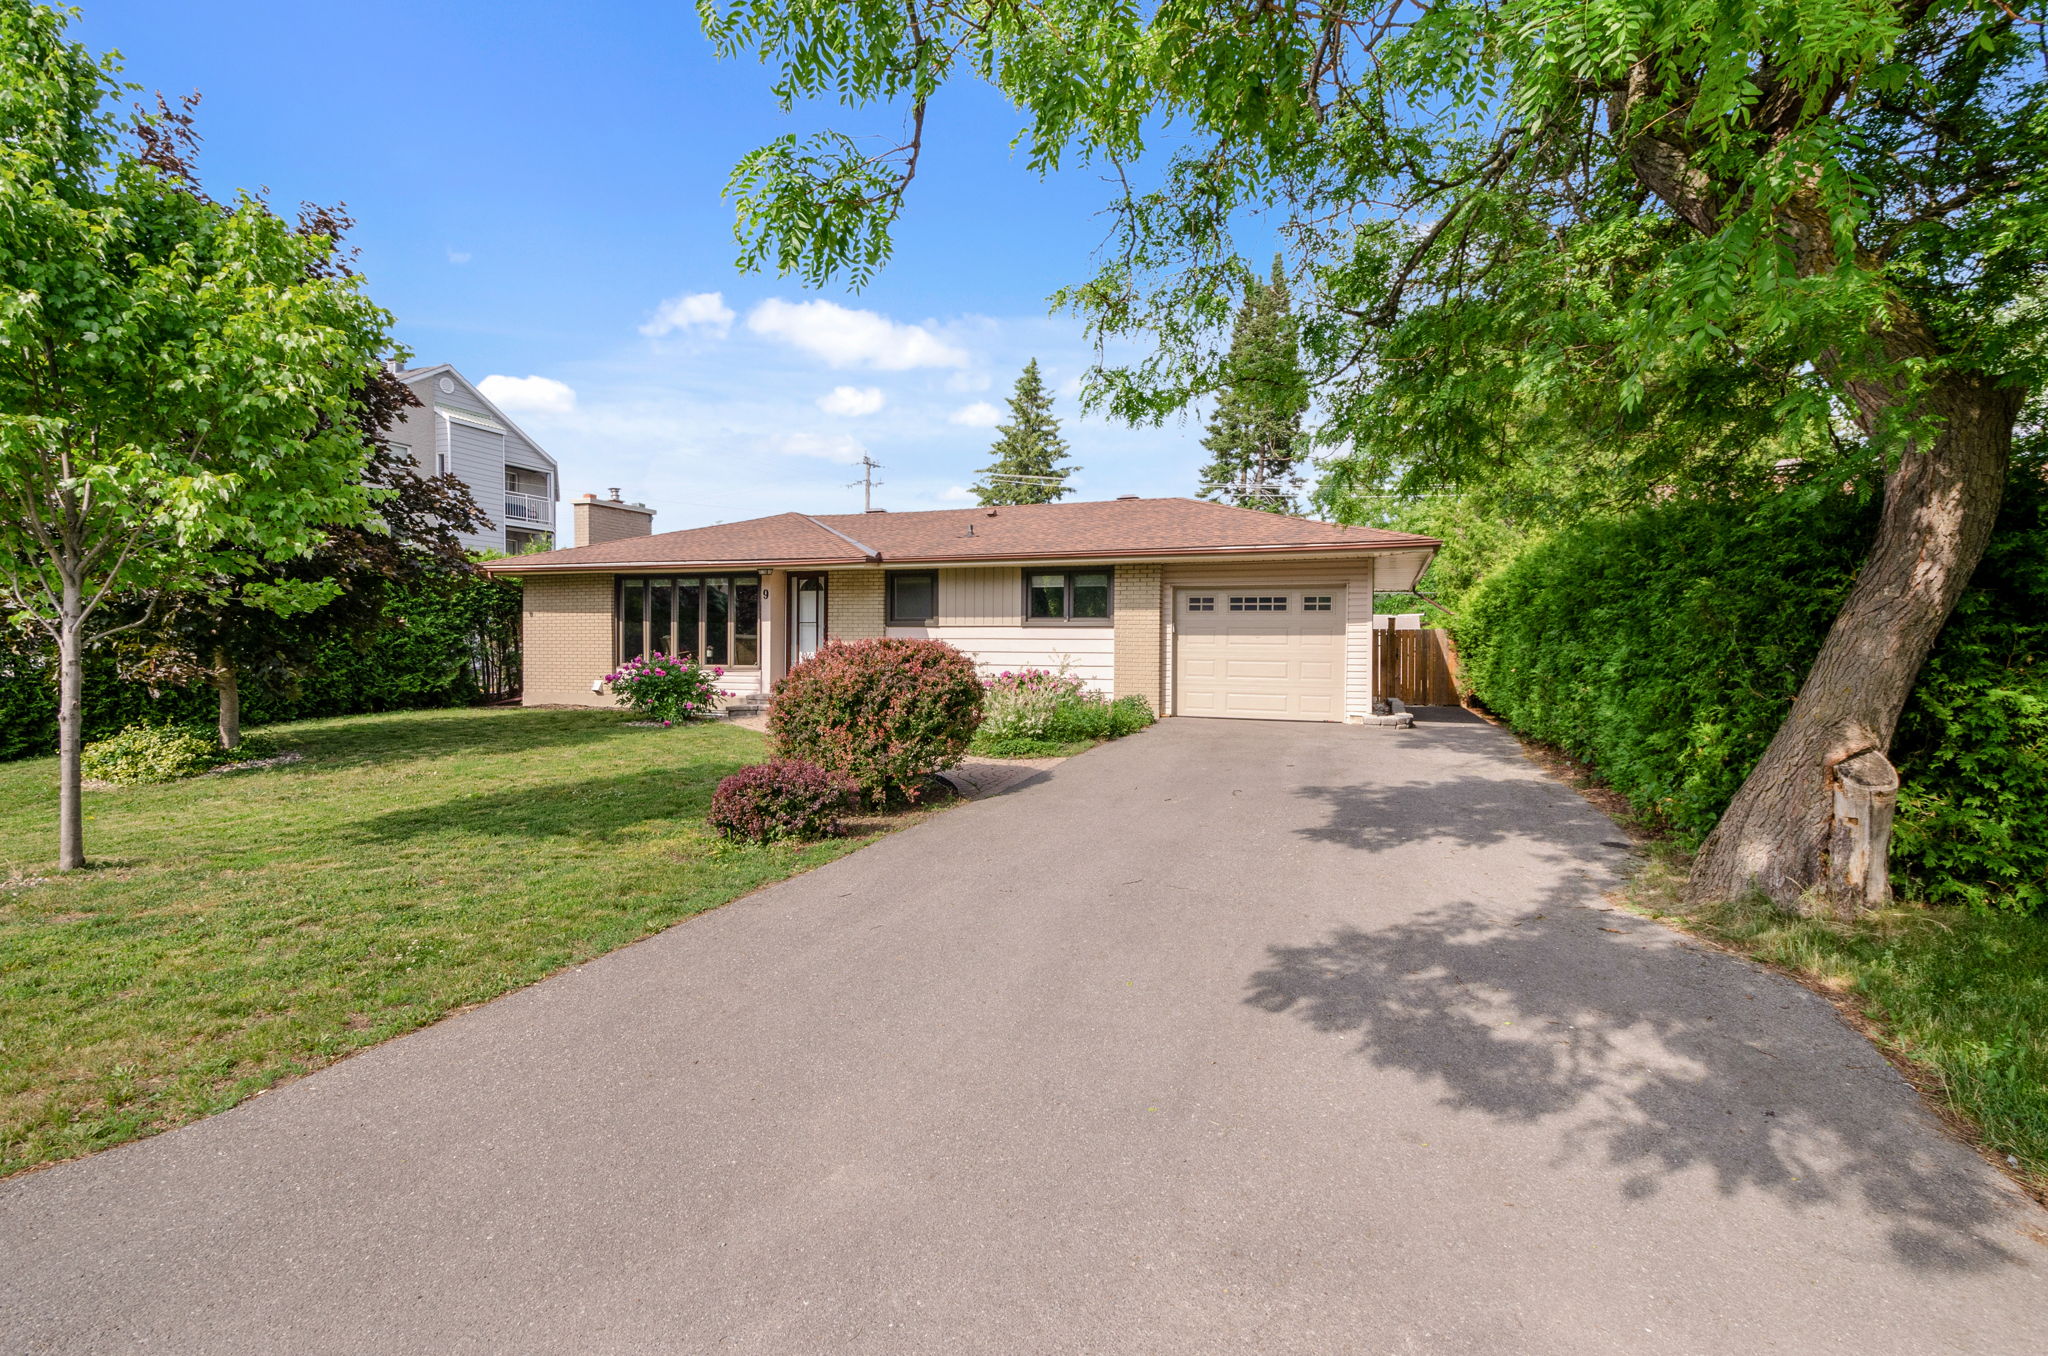 9 Thorncliff Pl, Ottawa, ON K2H 6L4 | Tezz Photography